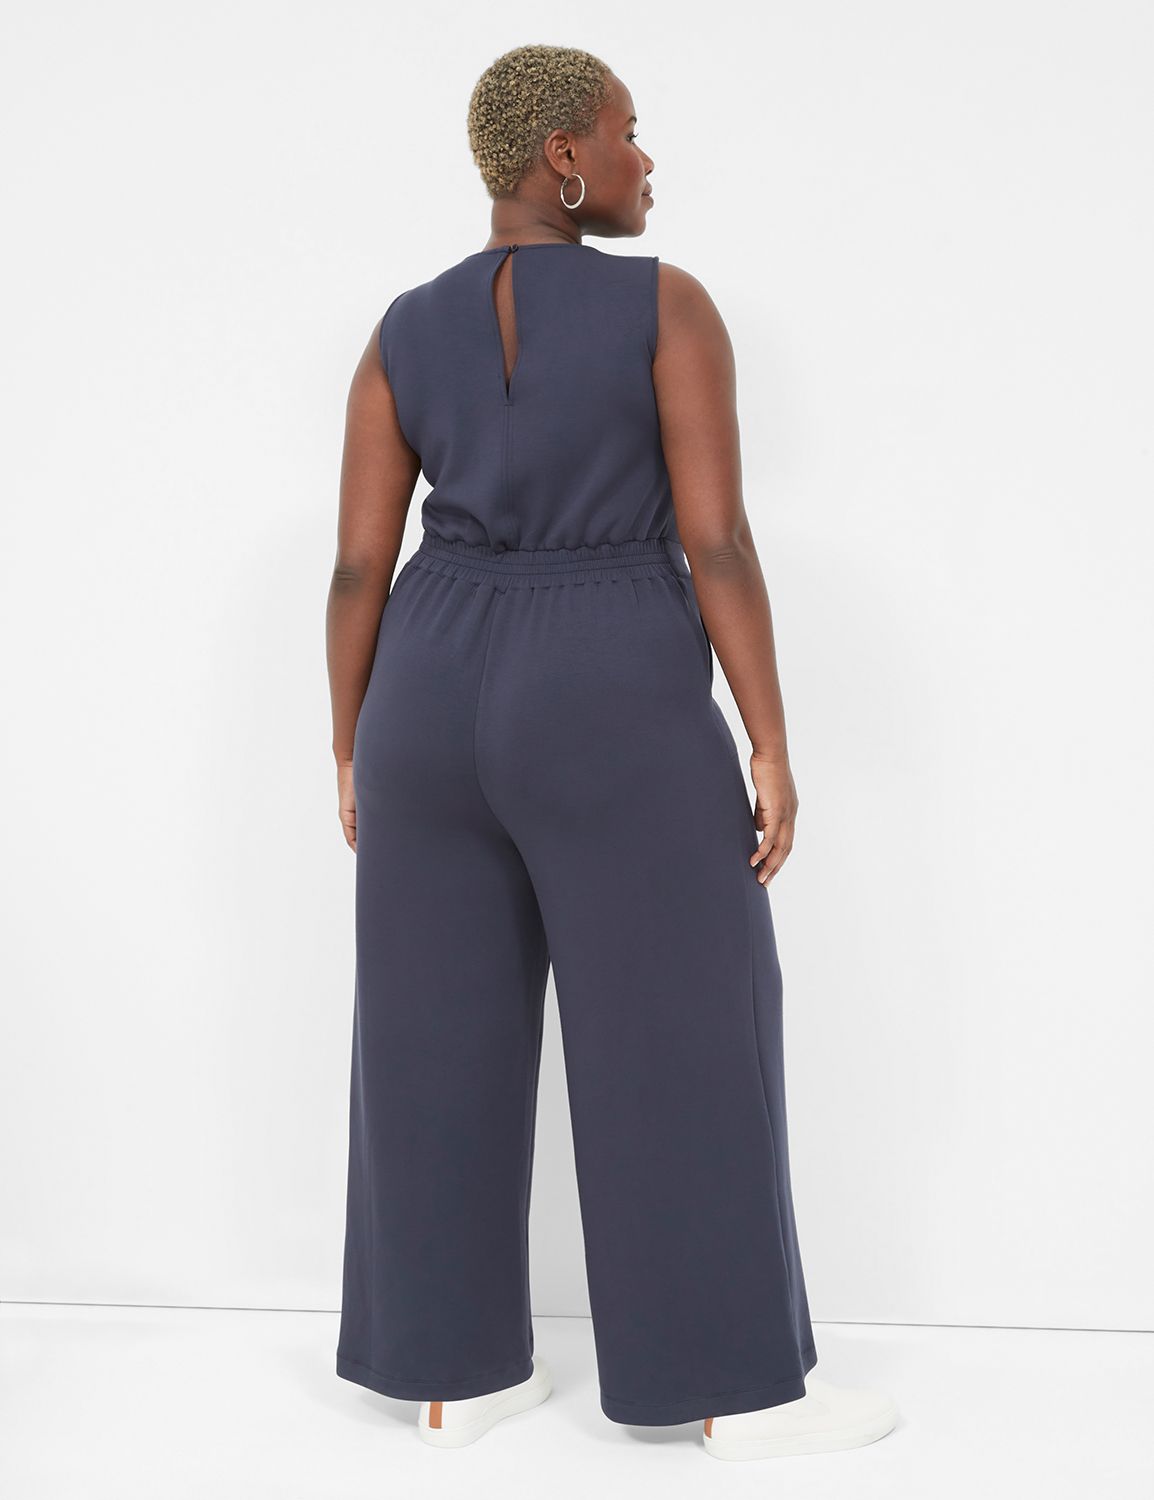 Assets By Spanx, Pants & Jumpsuits